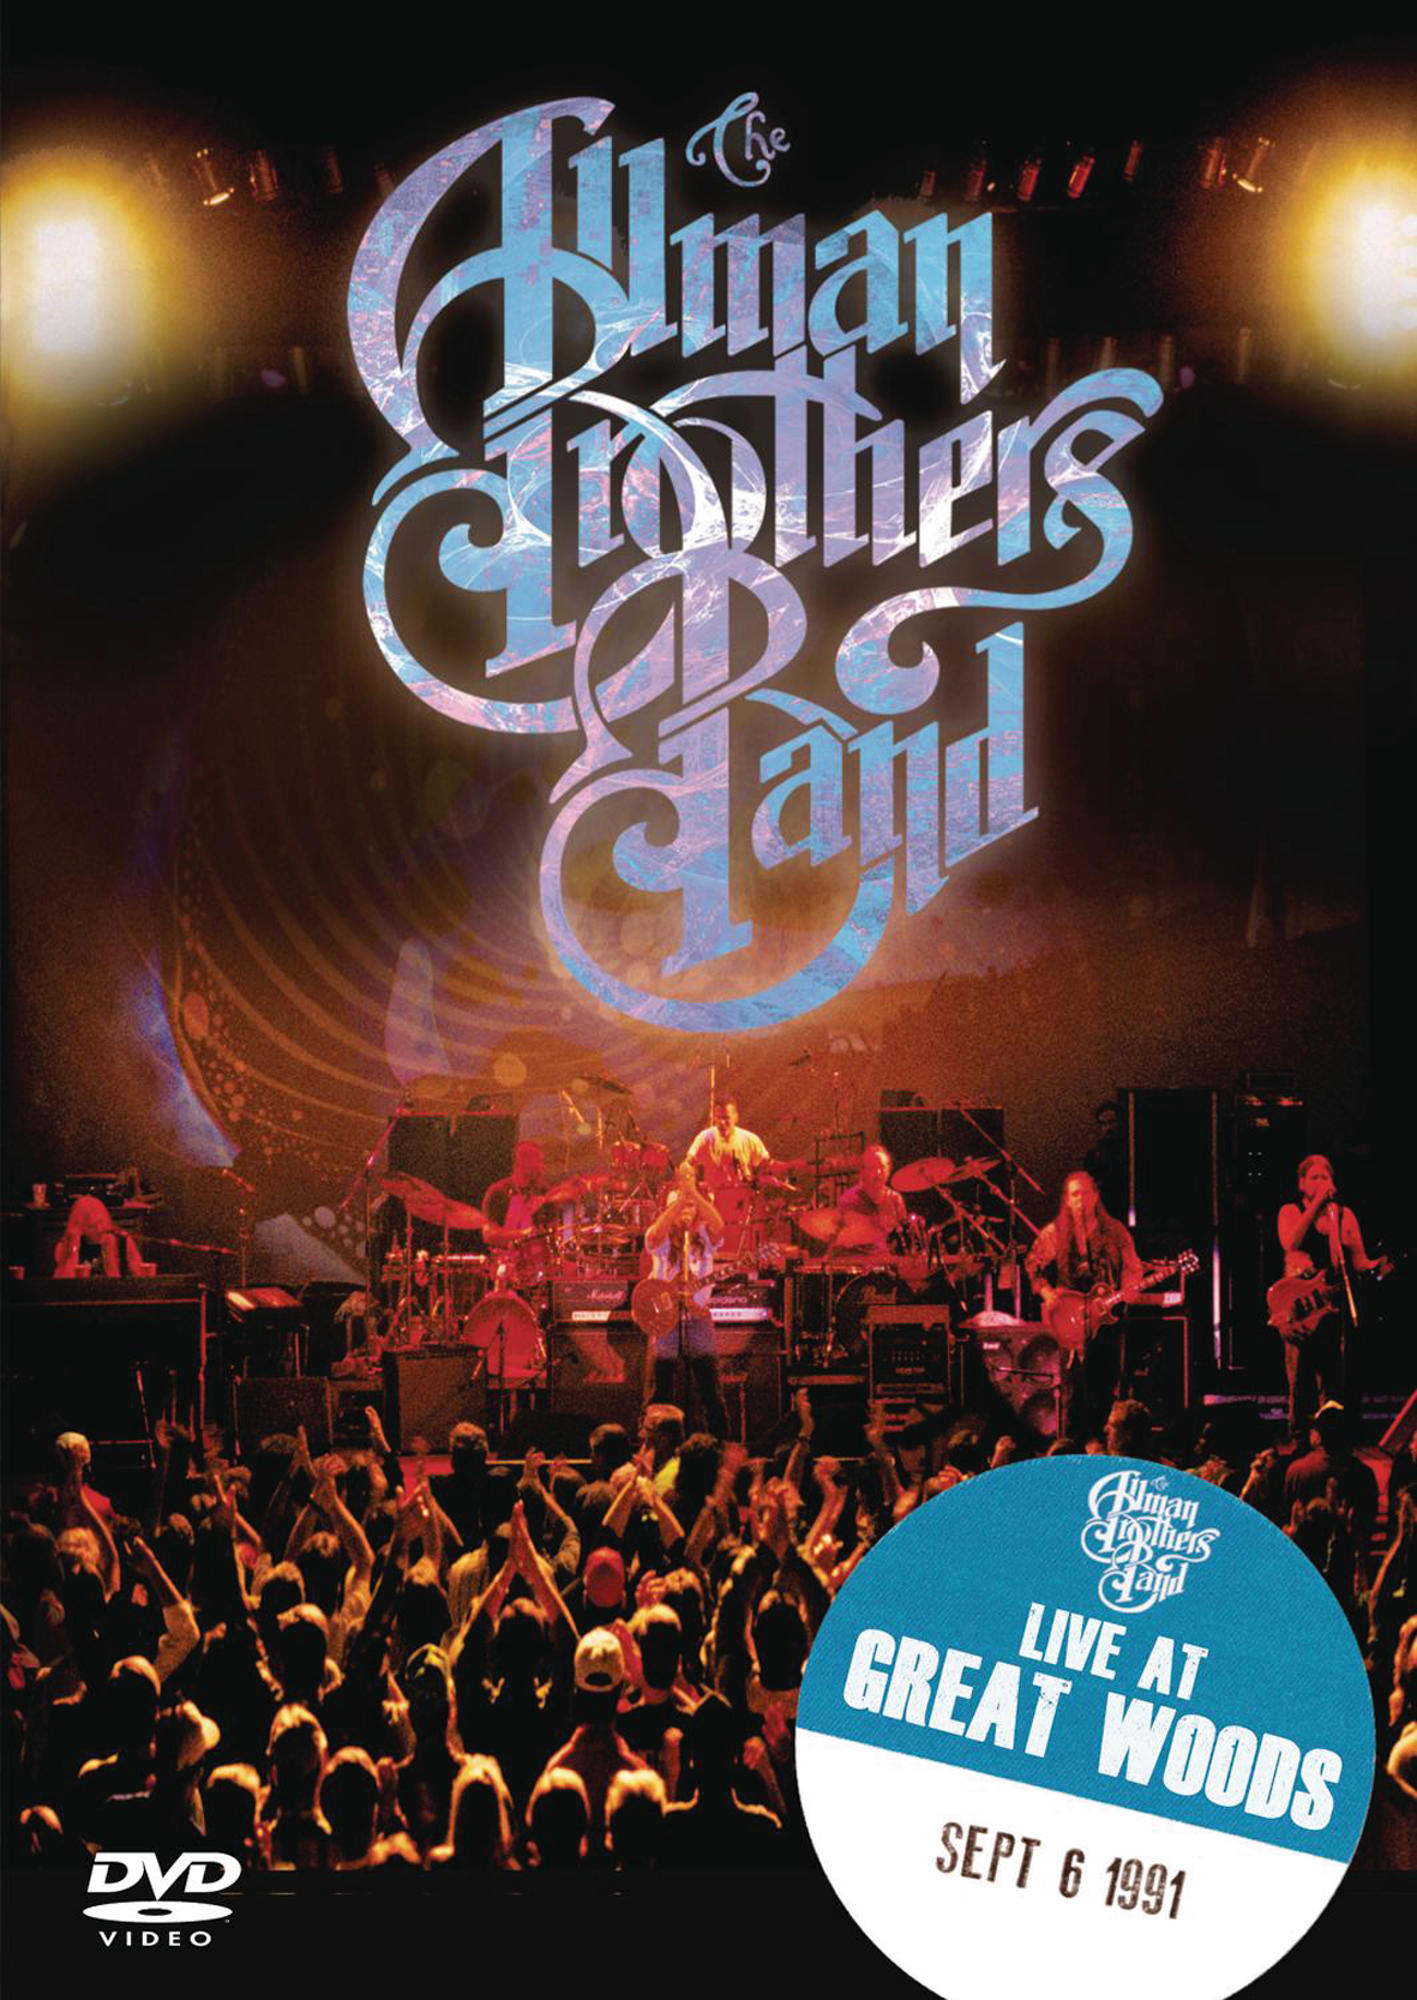 At Allman Brothers Woods Great Live The Band (DVD) - -